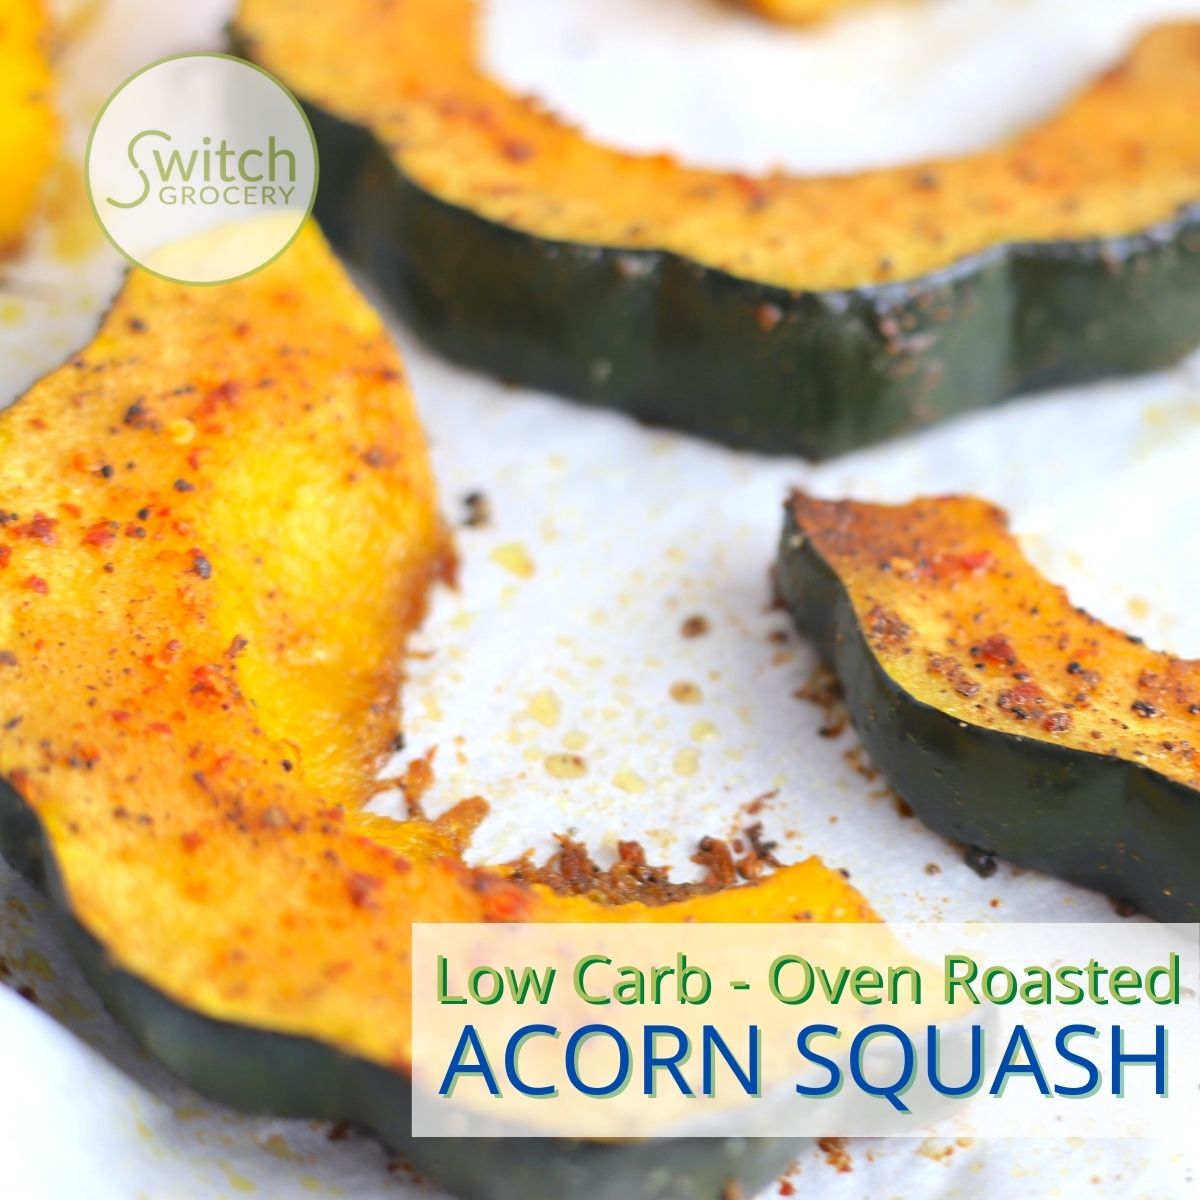 Low Carb Oven Roasted Acorn Squash